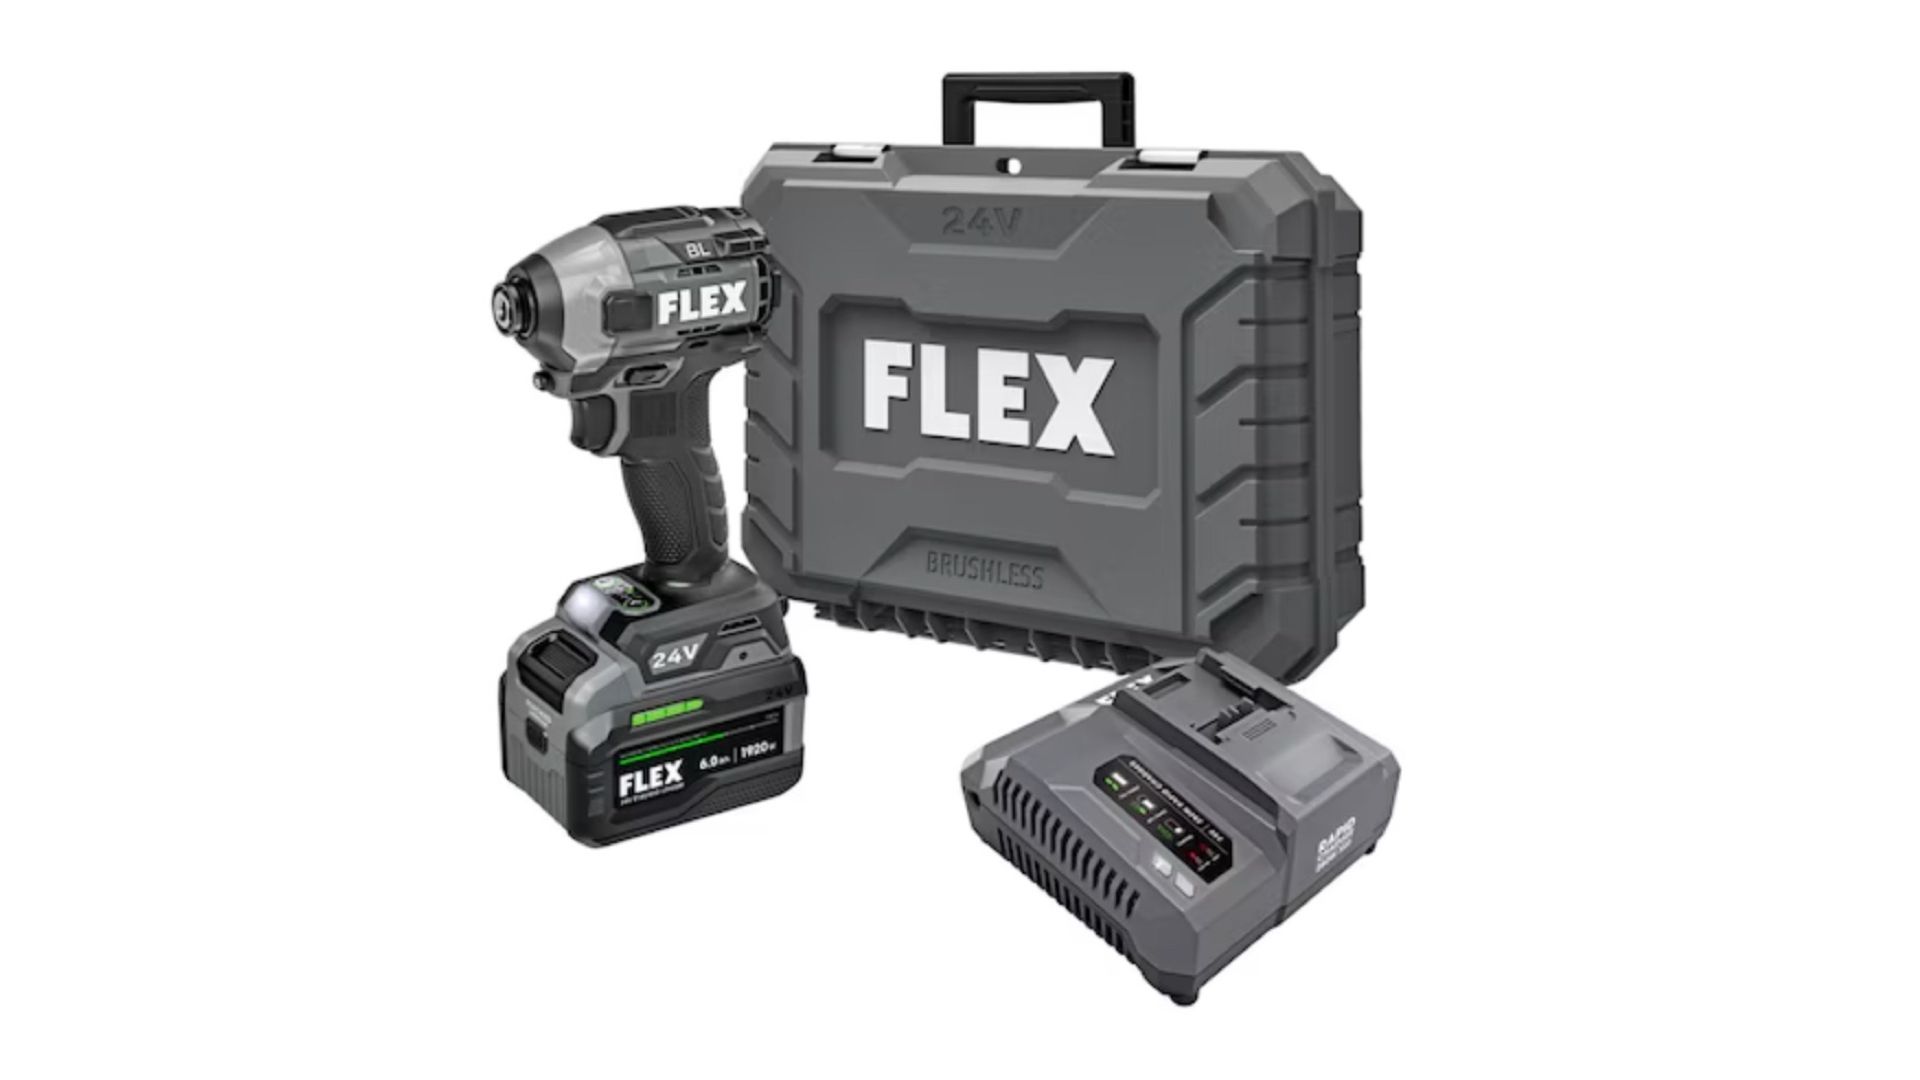 FLEX 24V tool, charger, and storage box.